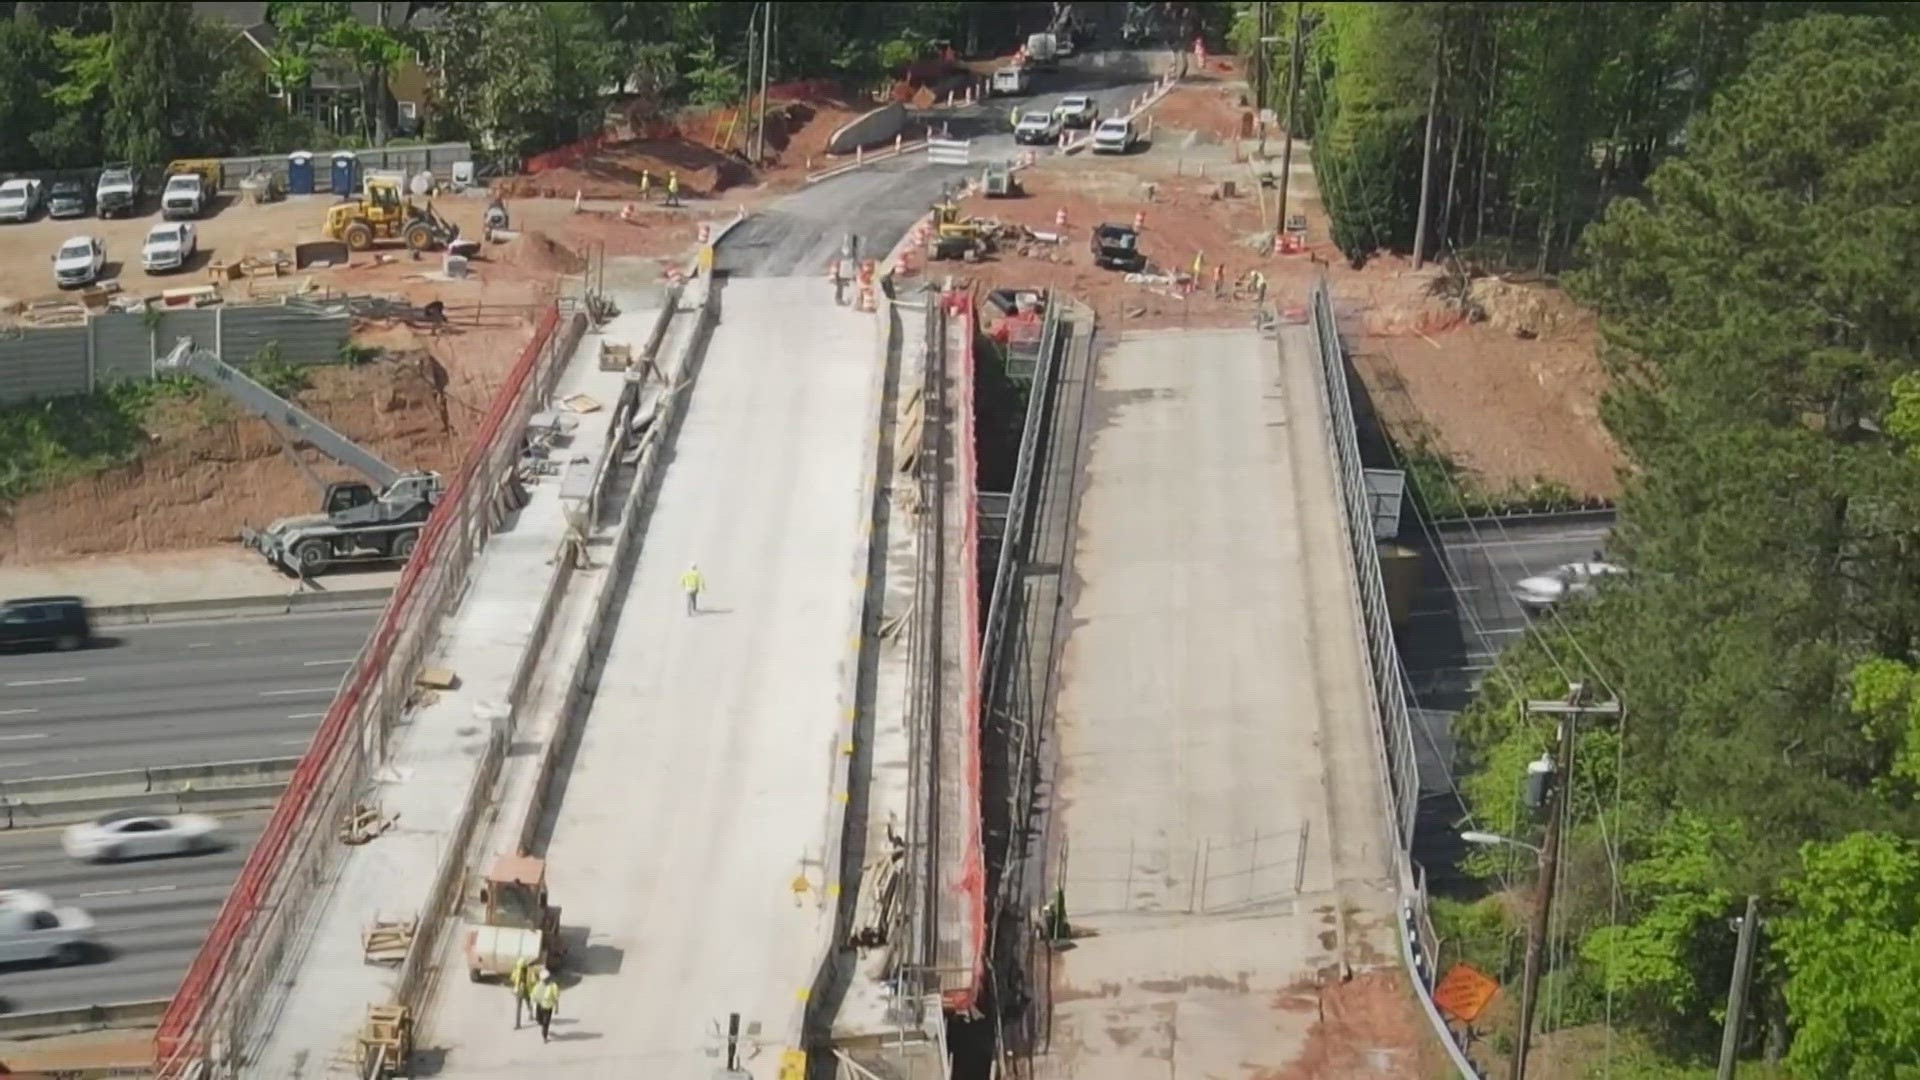 After nearly seven months of detours, the Georgia Department of Transportation is set to open the new Mt. Vernon Highway Bridge next week.